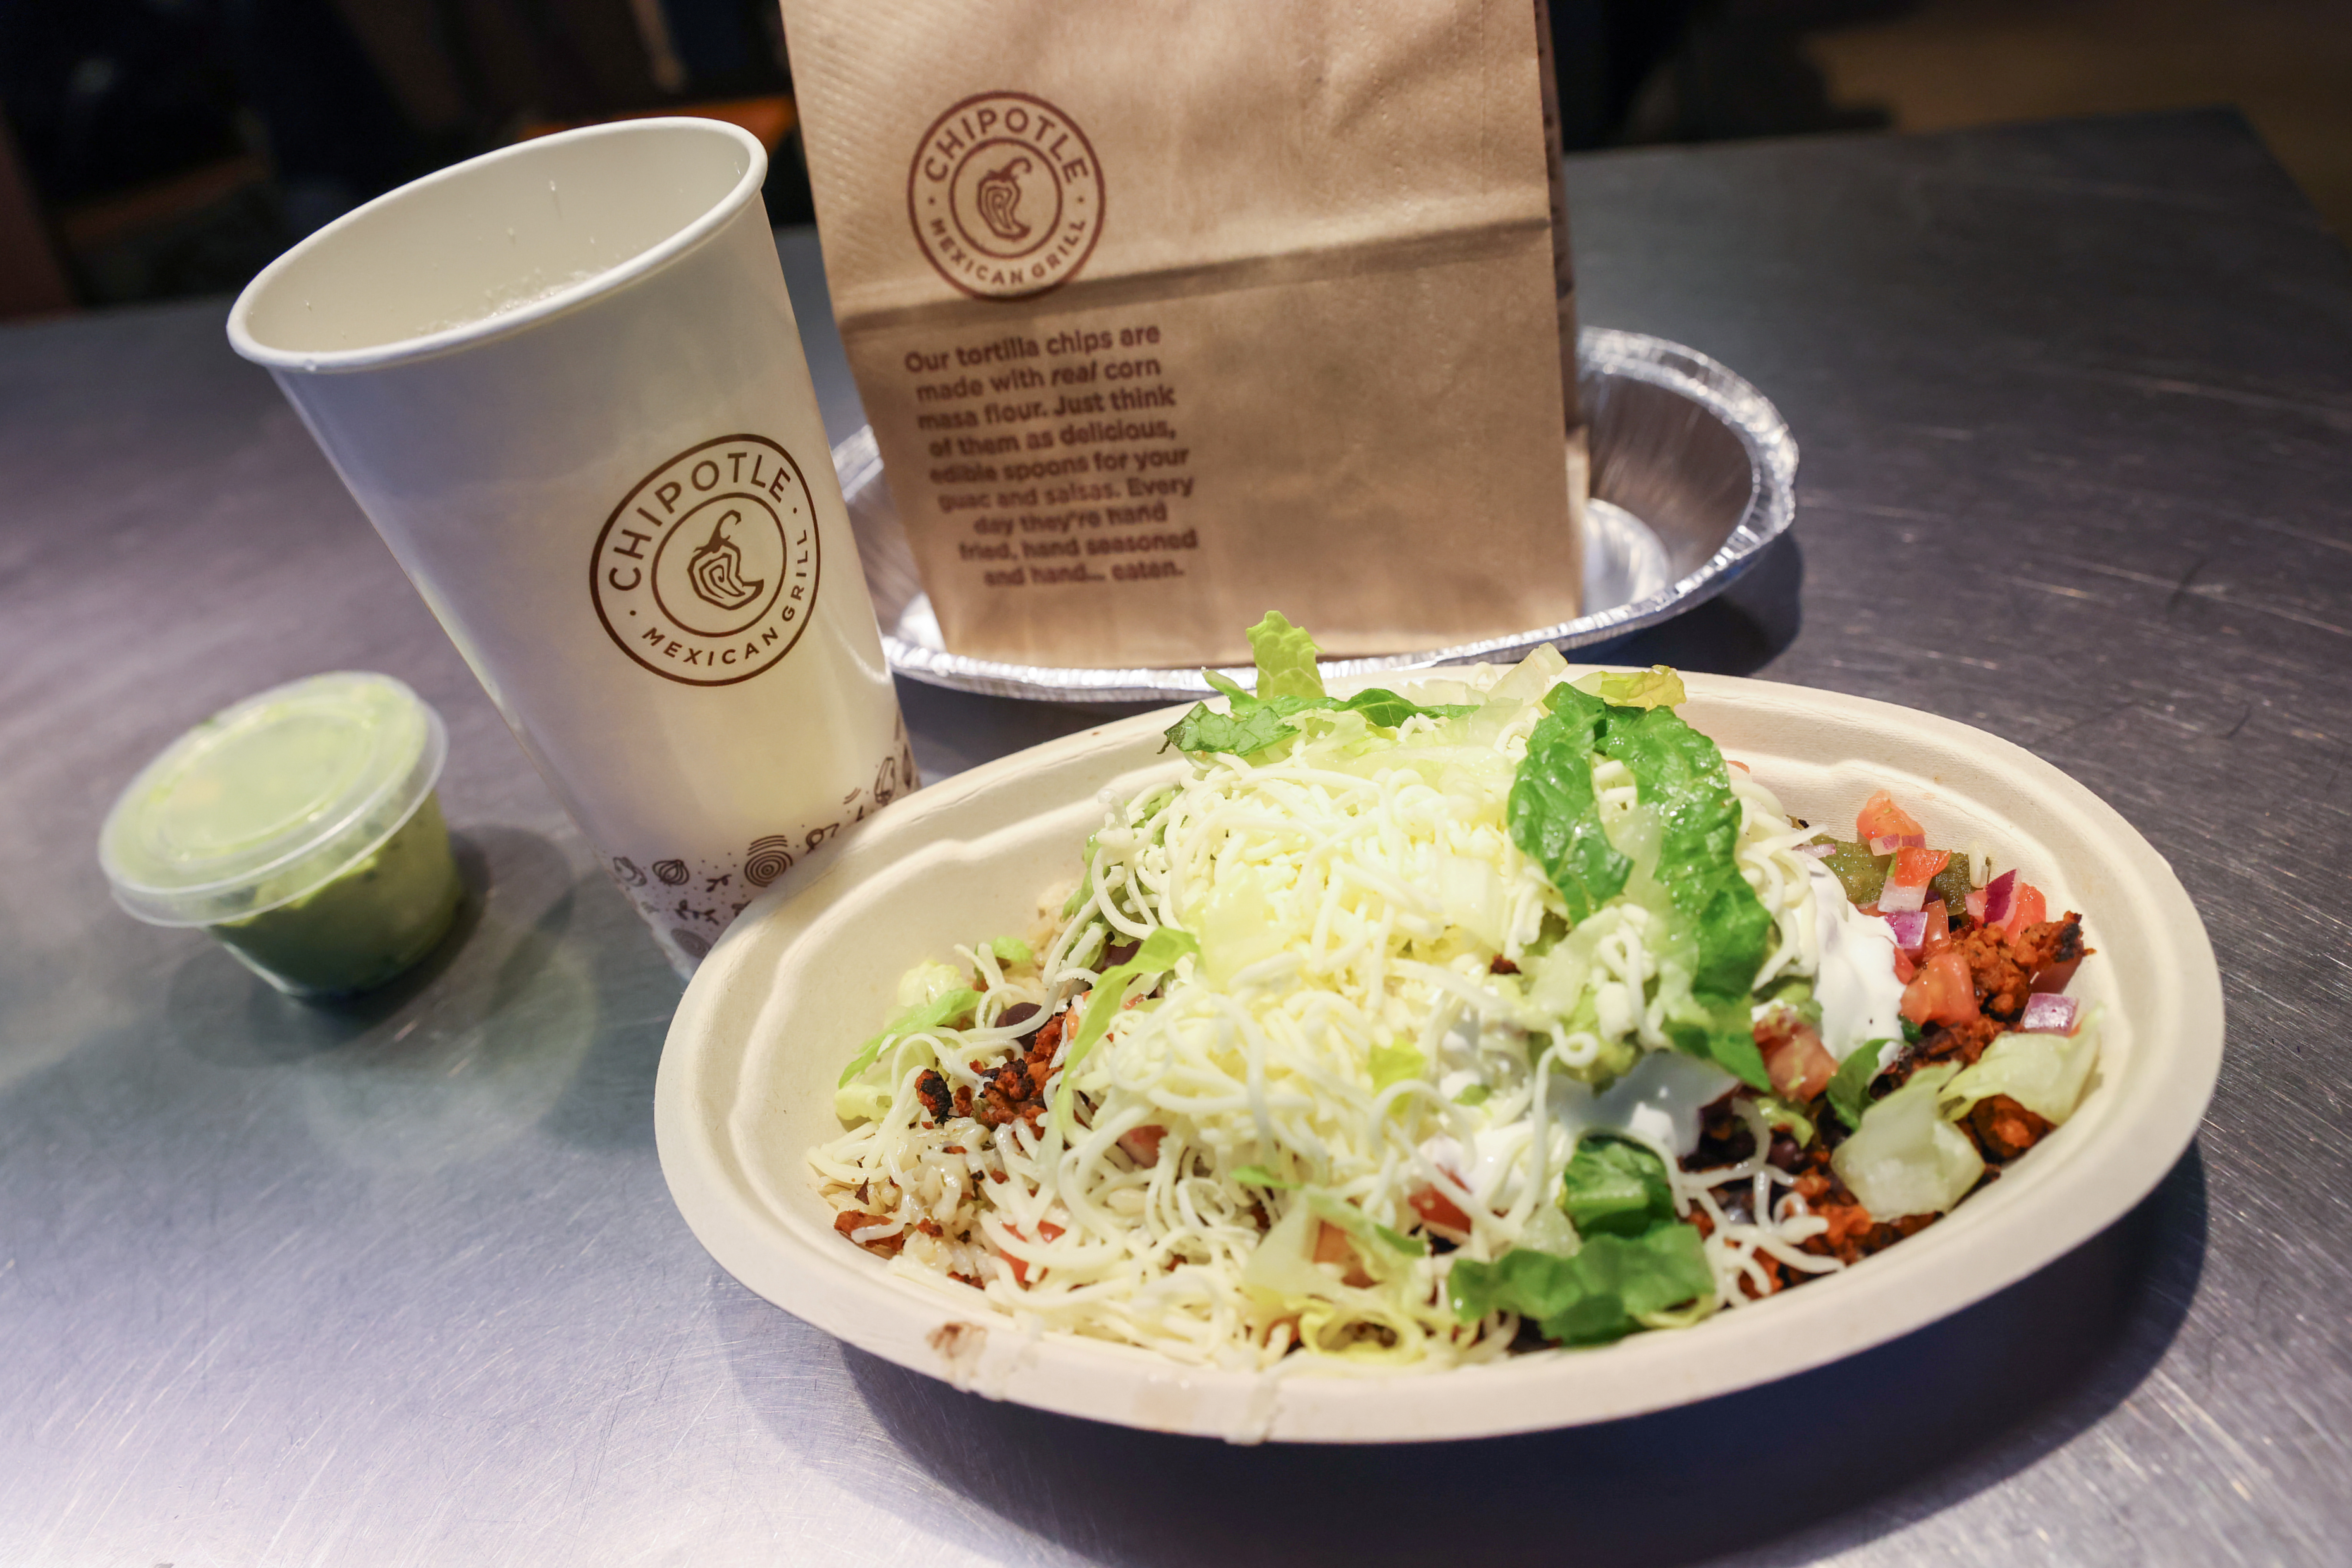 chipotle food prices